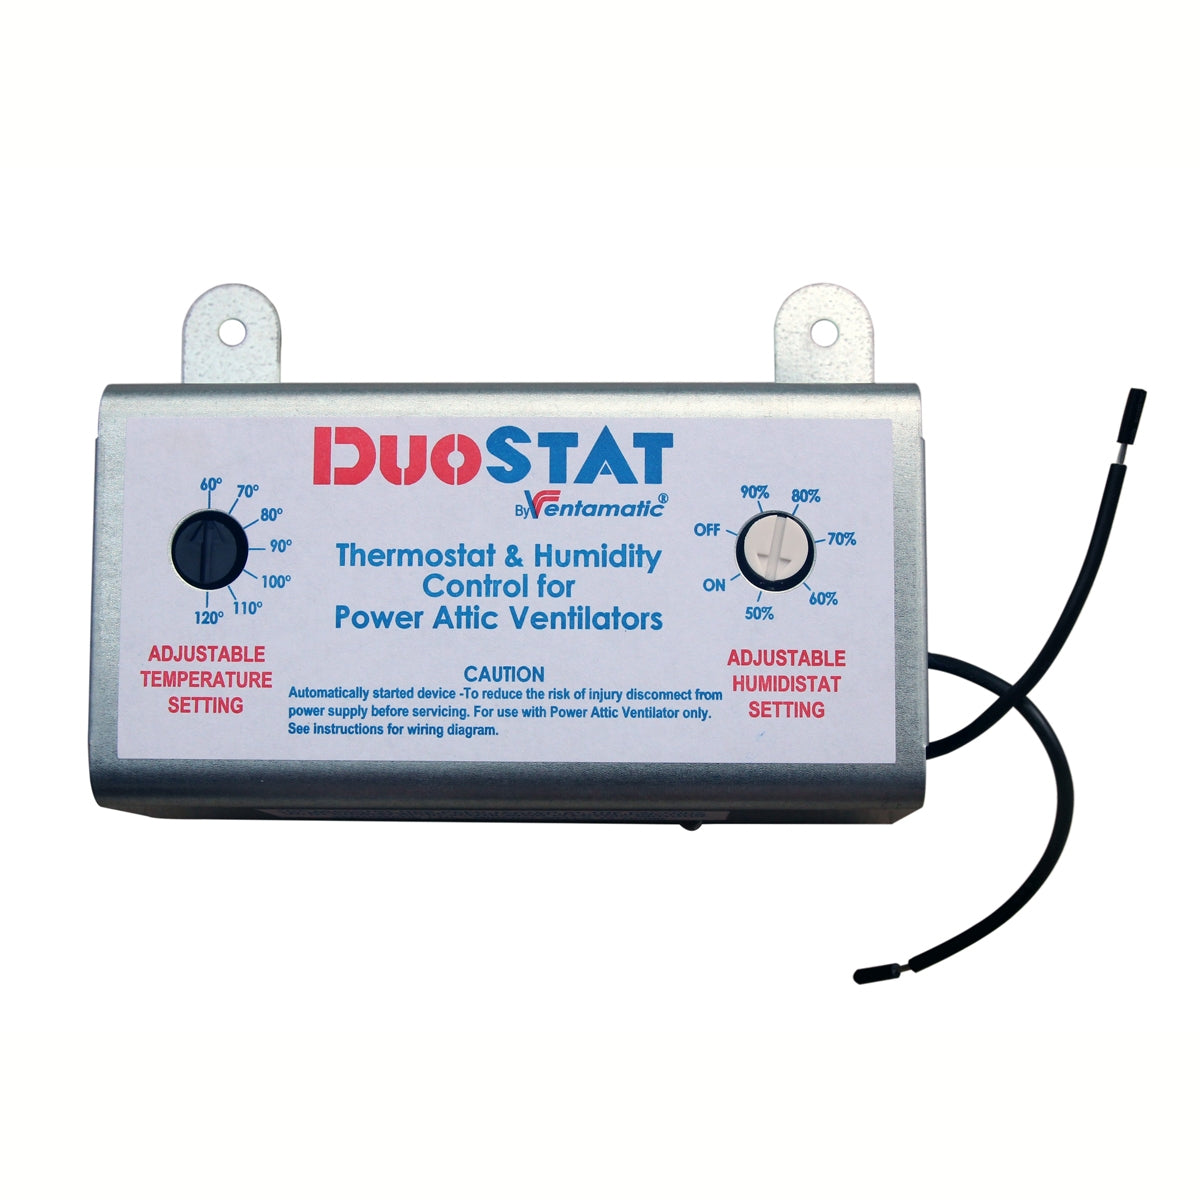 Front view of the duostat showing the temperature and humidity controls. 